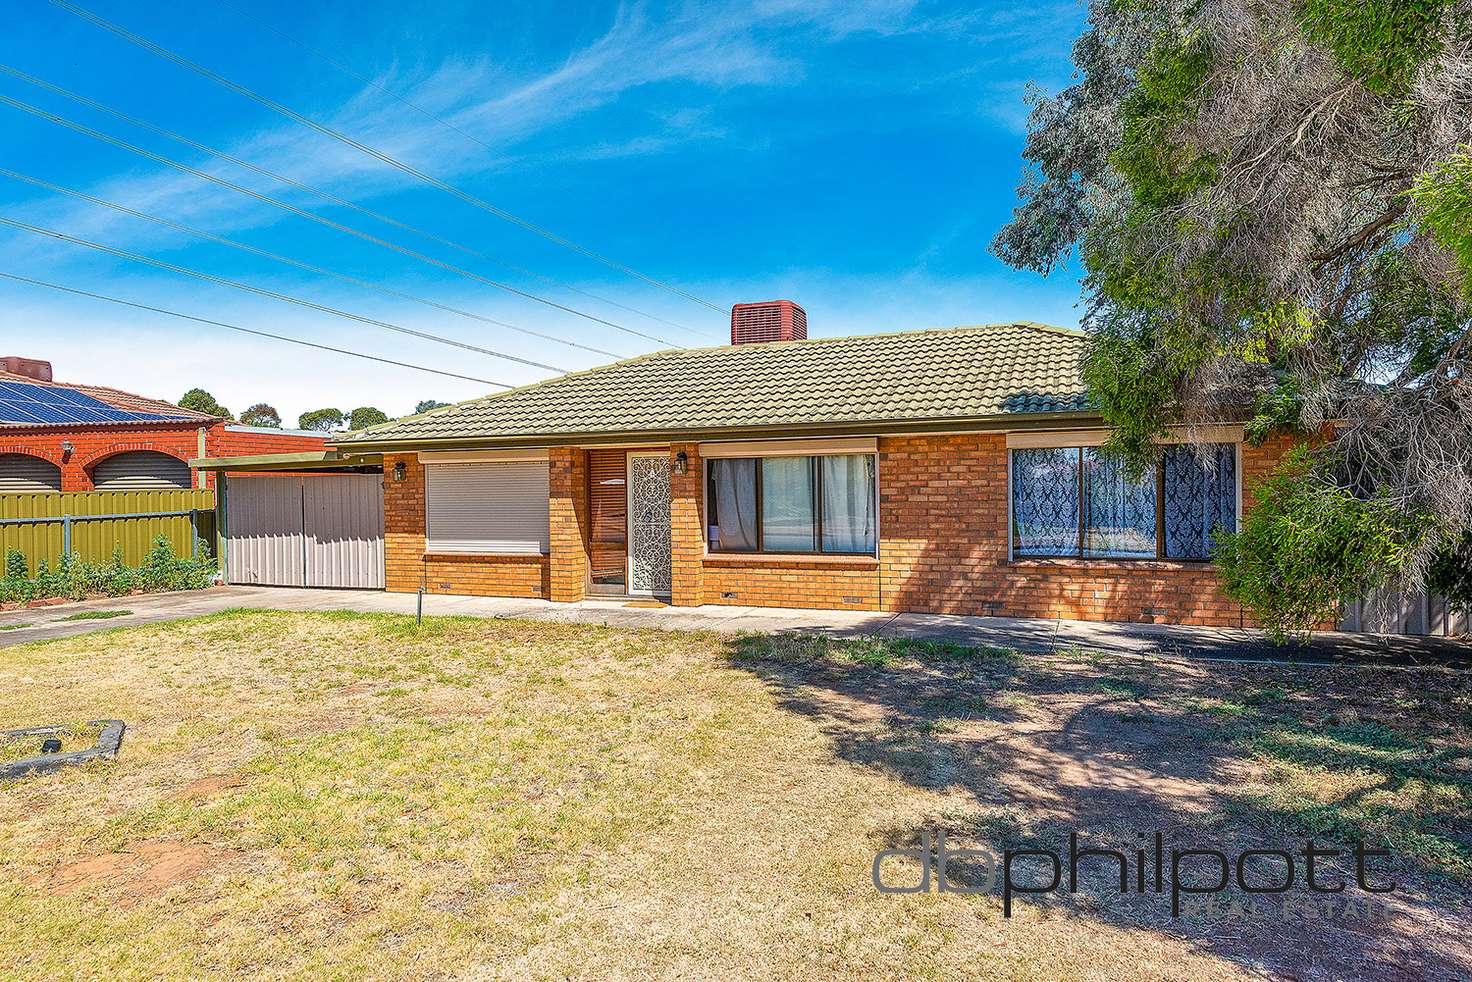 Main view of Homely house listing, 19 Jamison St, Parafield Gardens SA 5107